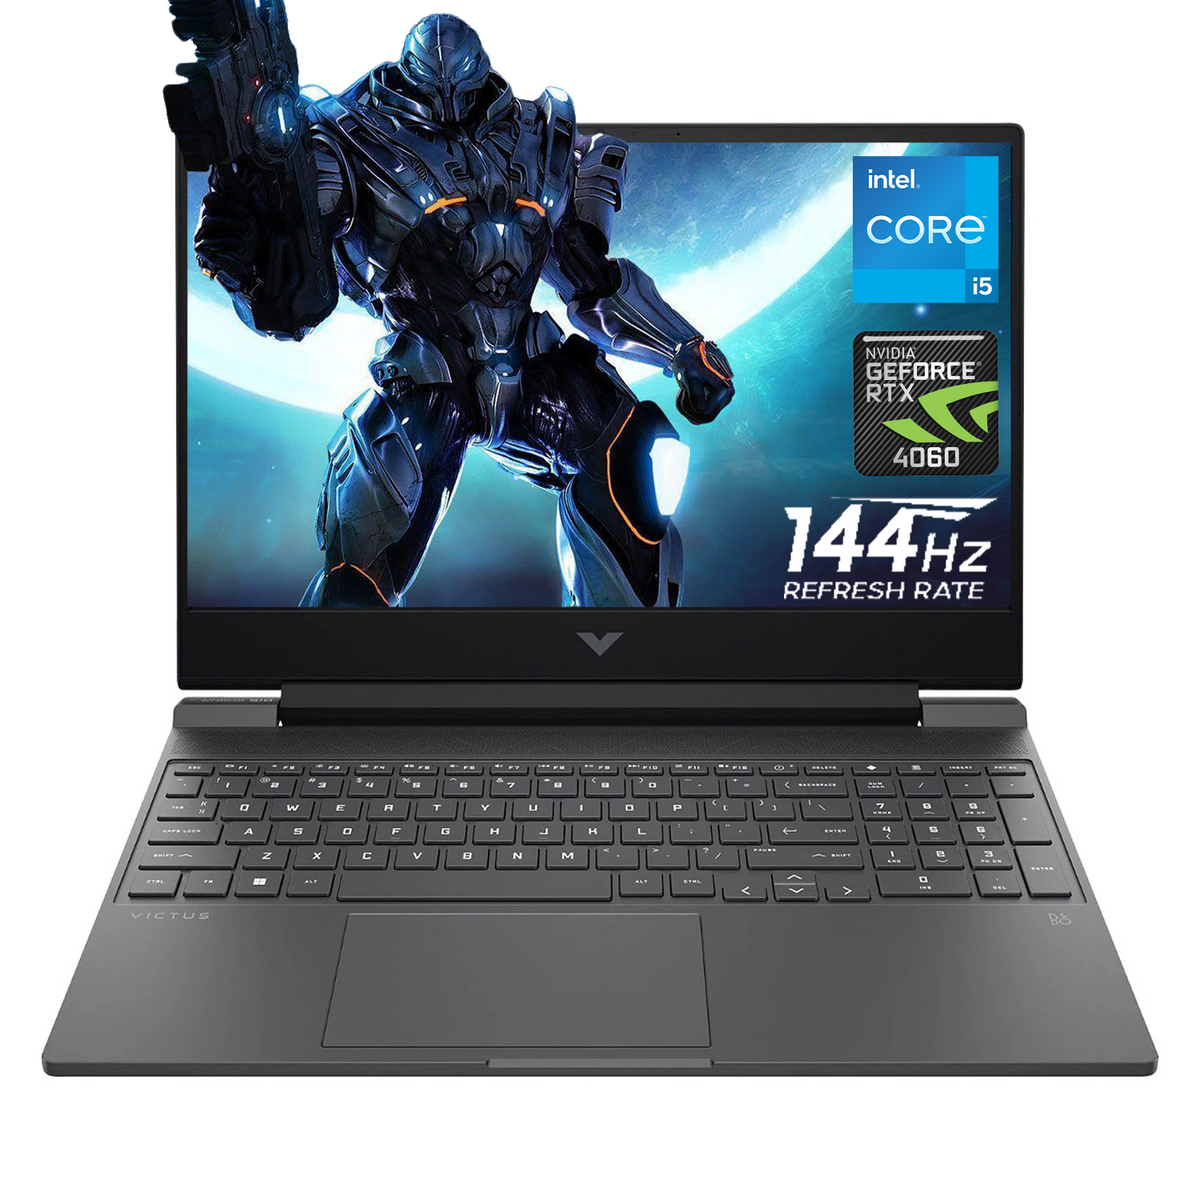 HP Victus Gaming Laptop, 15.6" FHD 1920 * 1080 Non-touch 144Hz, Intel Core i5-12500H, NVIDIA GeForce RTX 4060, 16GB DDR4 RAM, 512GB PCIe M.2 SSD, Wi-Fi 6, Windows 11 Home, Grey